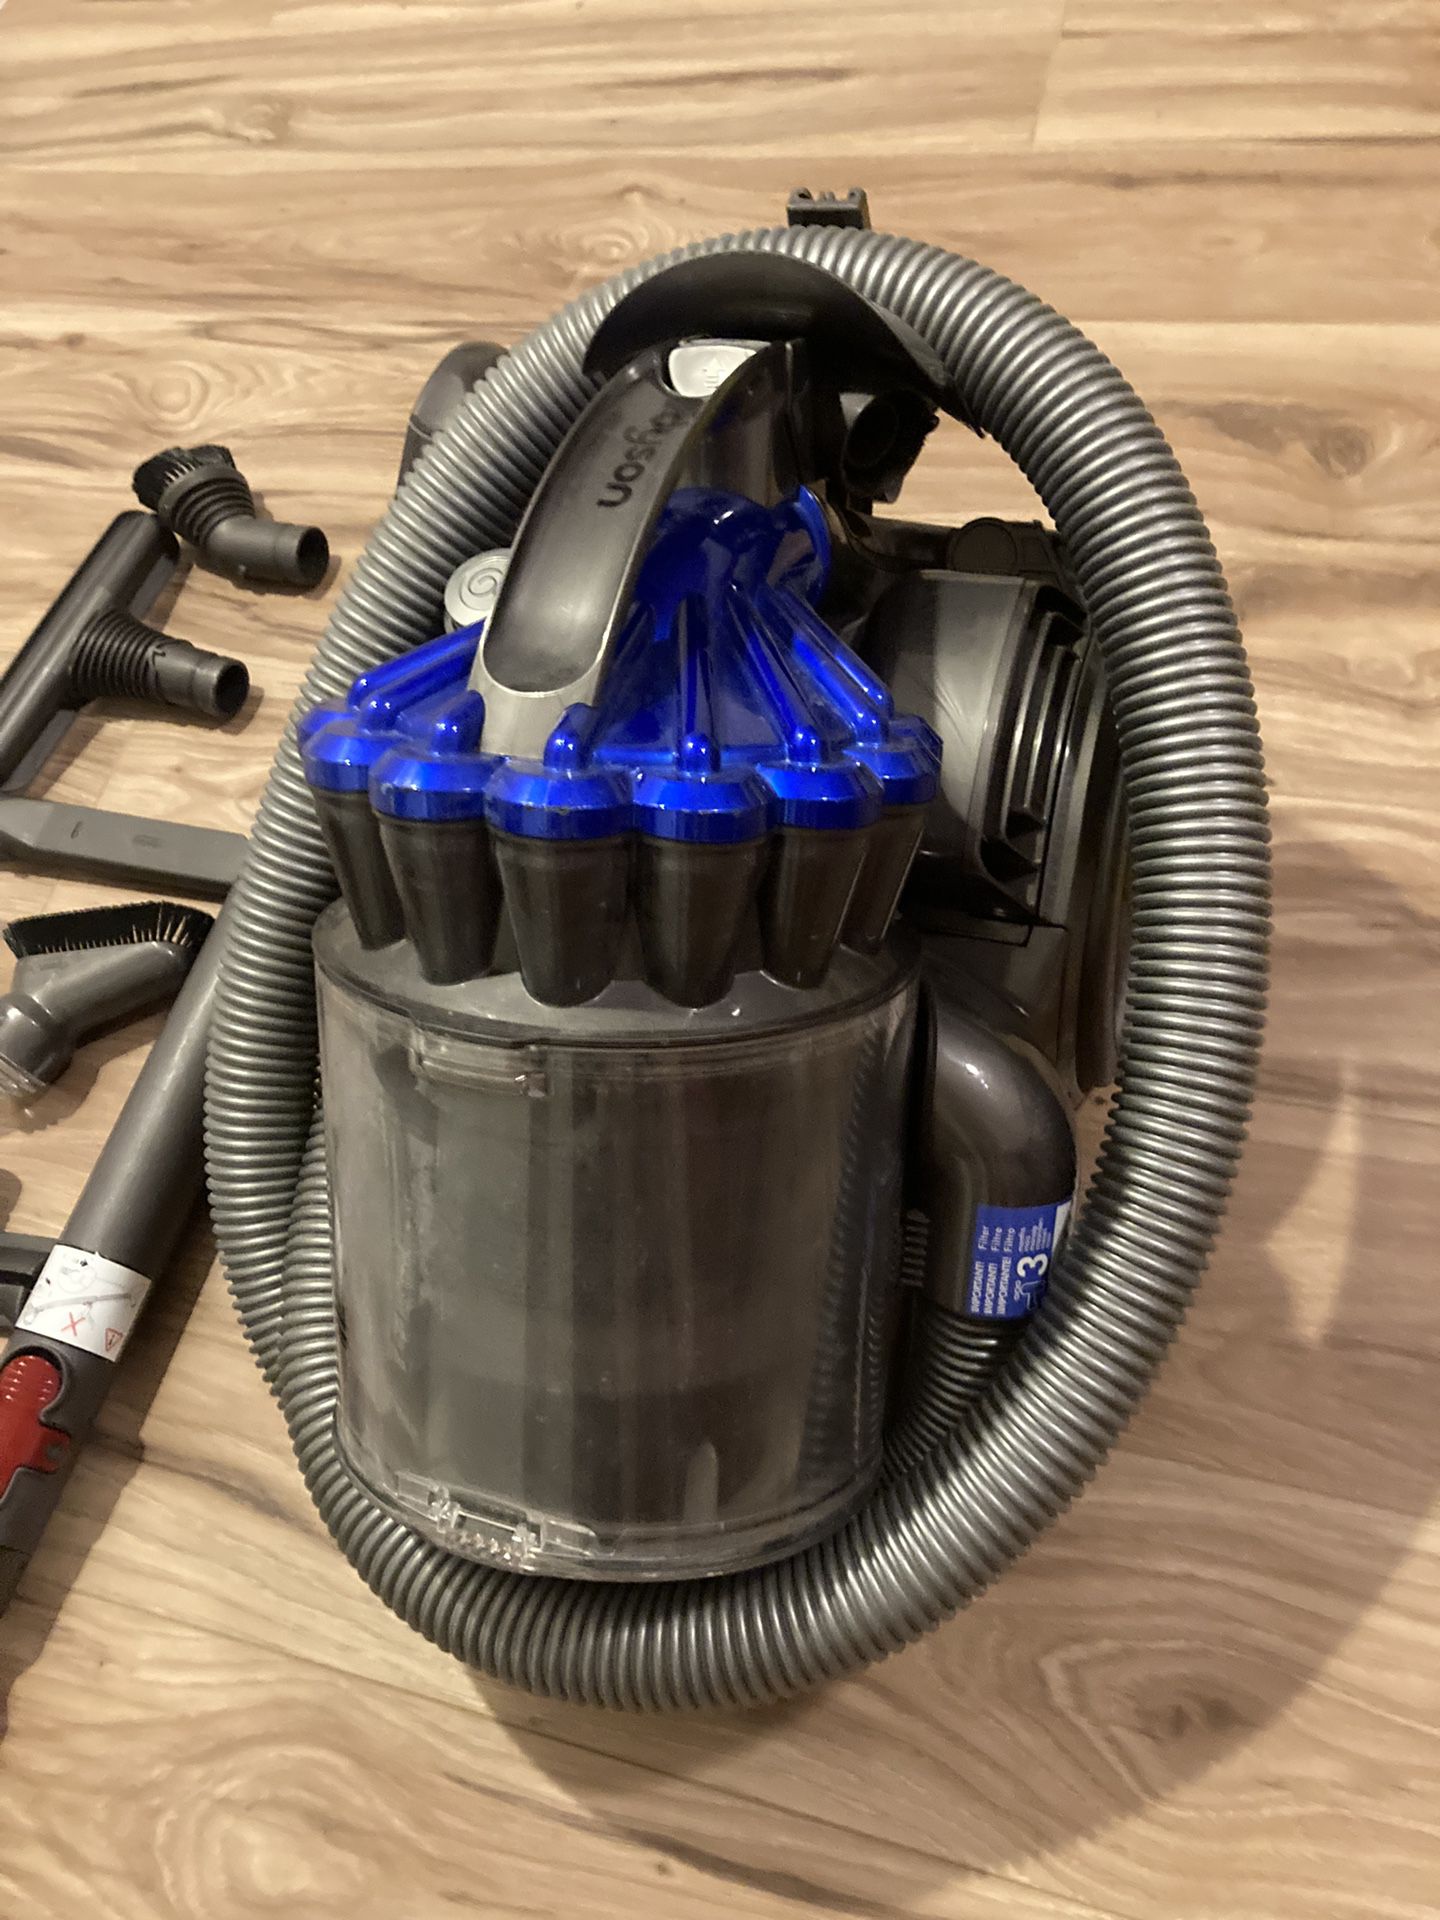 DYSON DC26 MULTI FLOOR COMPACT CANISTER VACUUM CLEANER